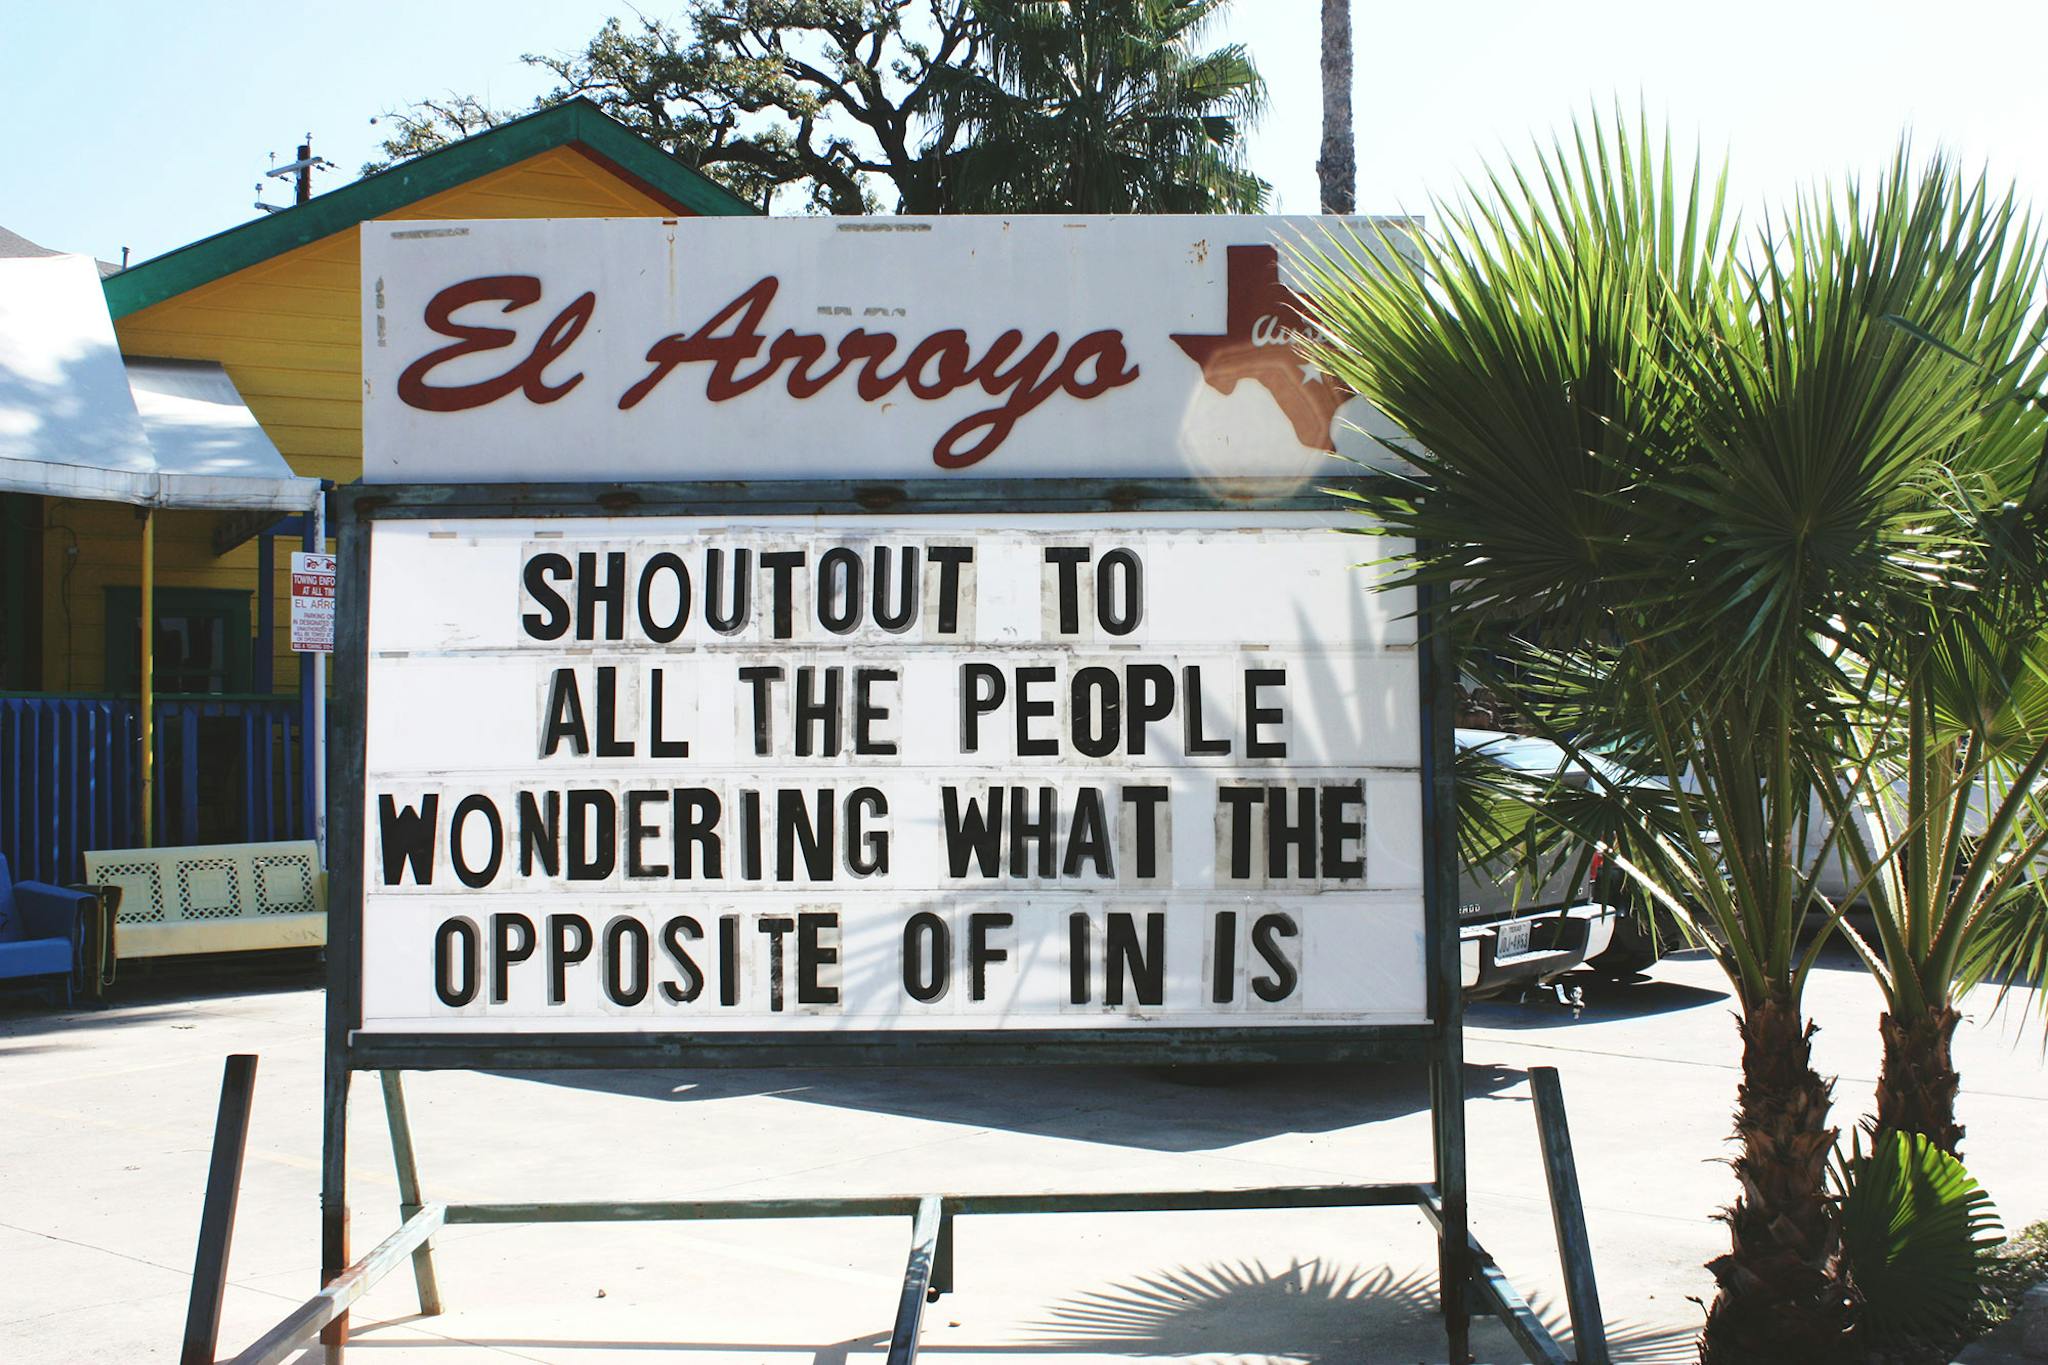 El Arroyo sign says shoutout to all the people wondering what the opposite of in is.